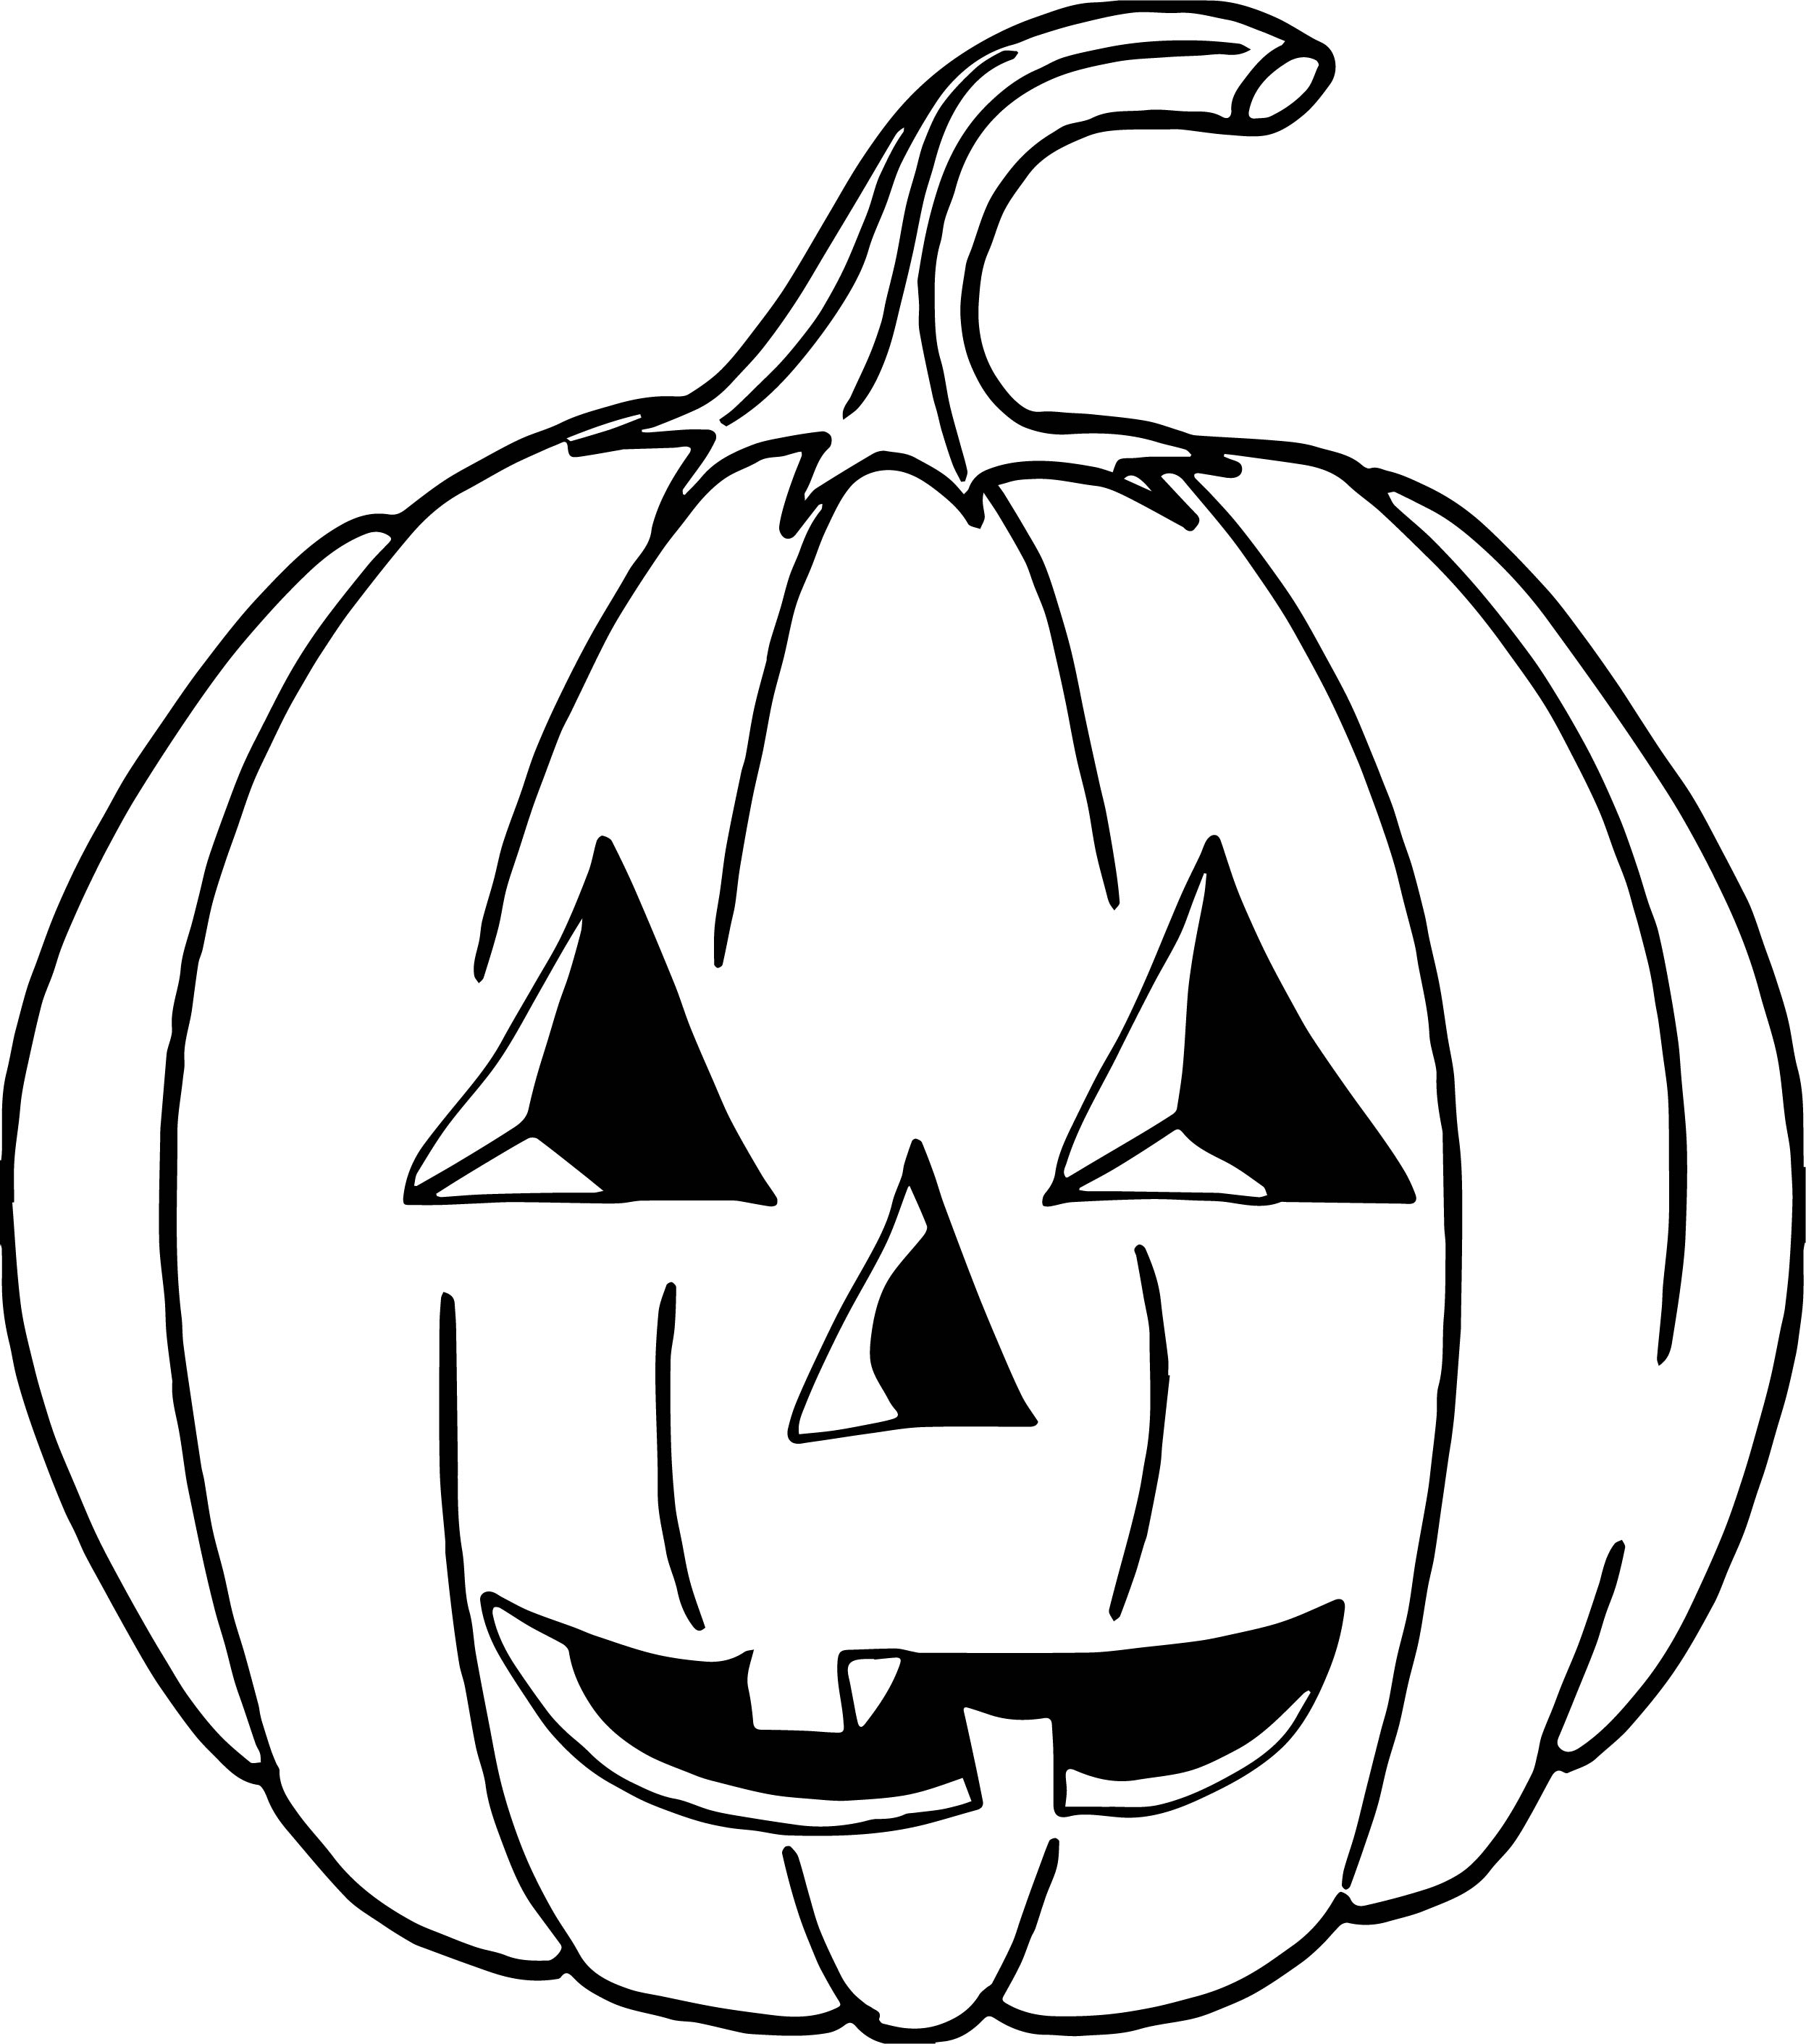 Happy Jack O Lantern Coloring Pages Coloring Ideas Fabulous Jack O Lantern Coloring Sheet Picture